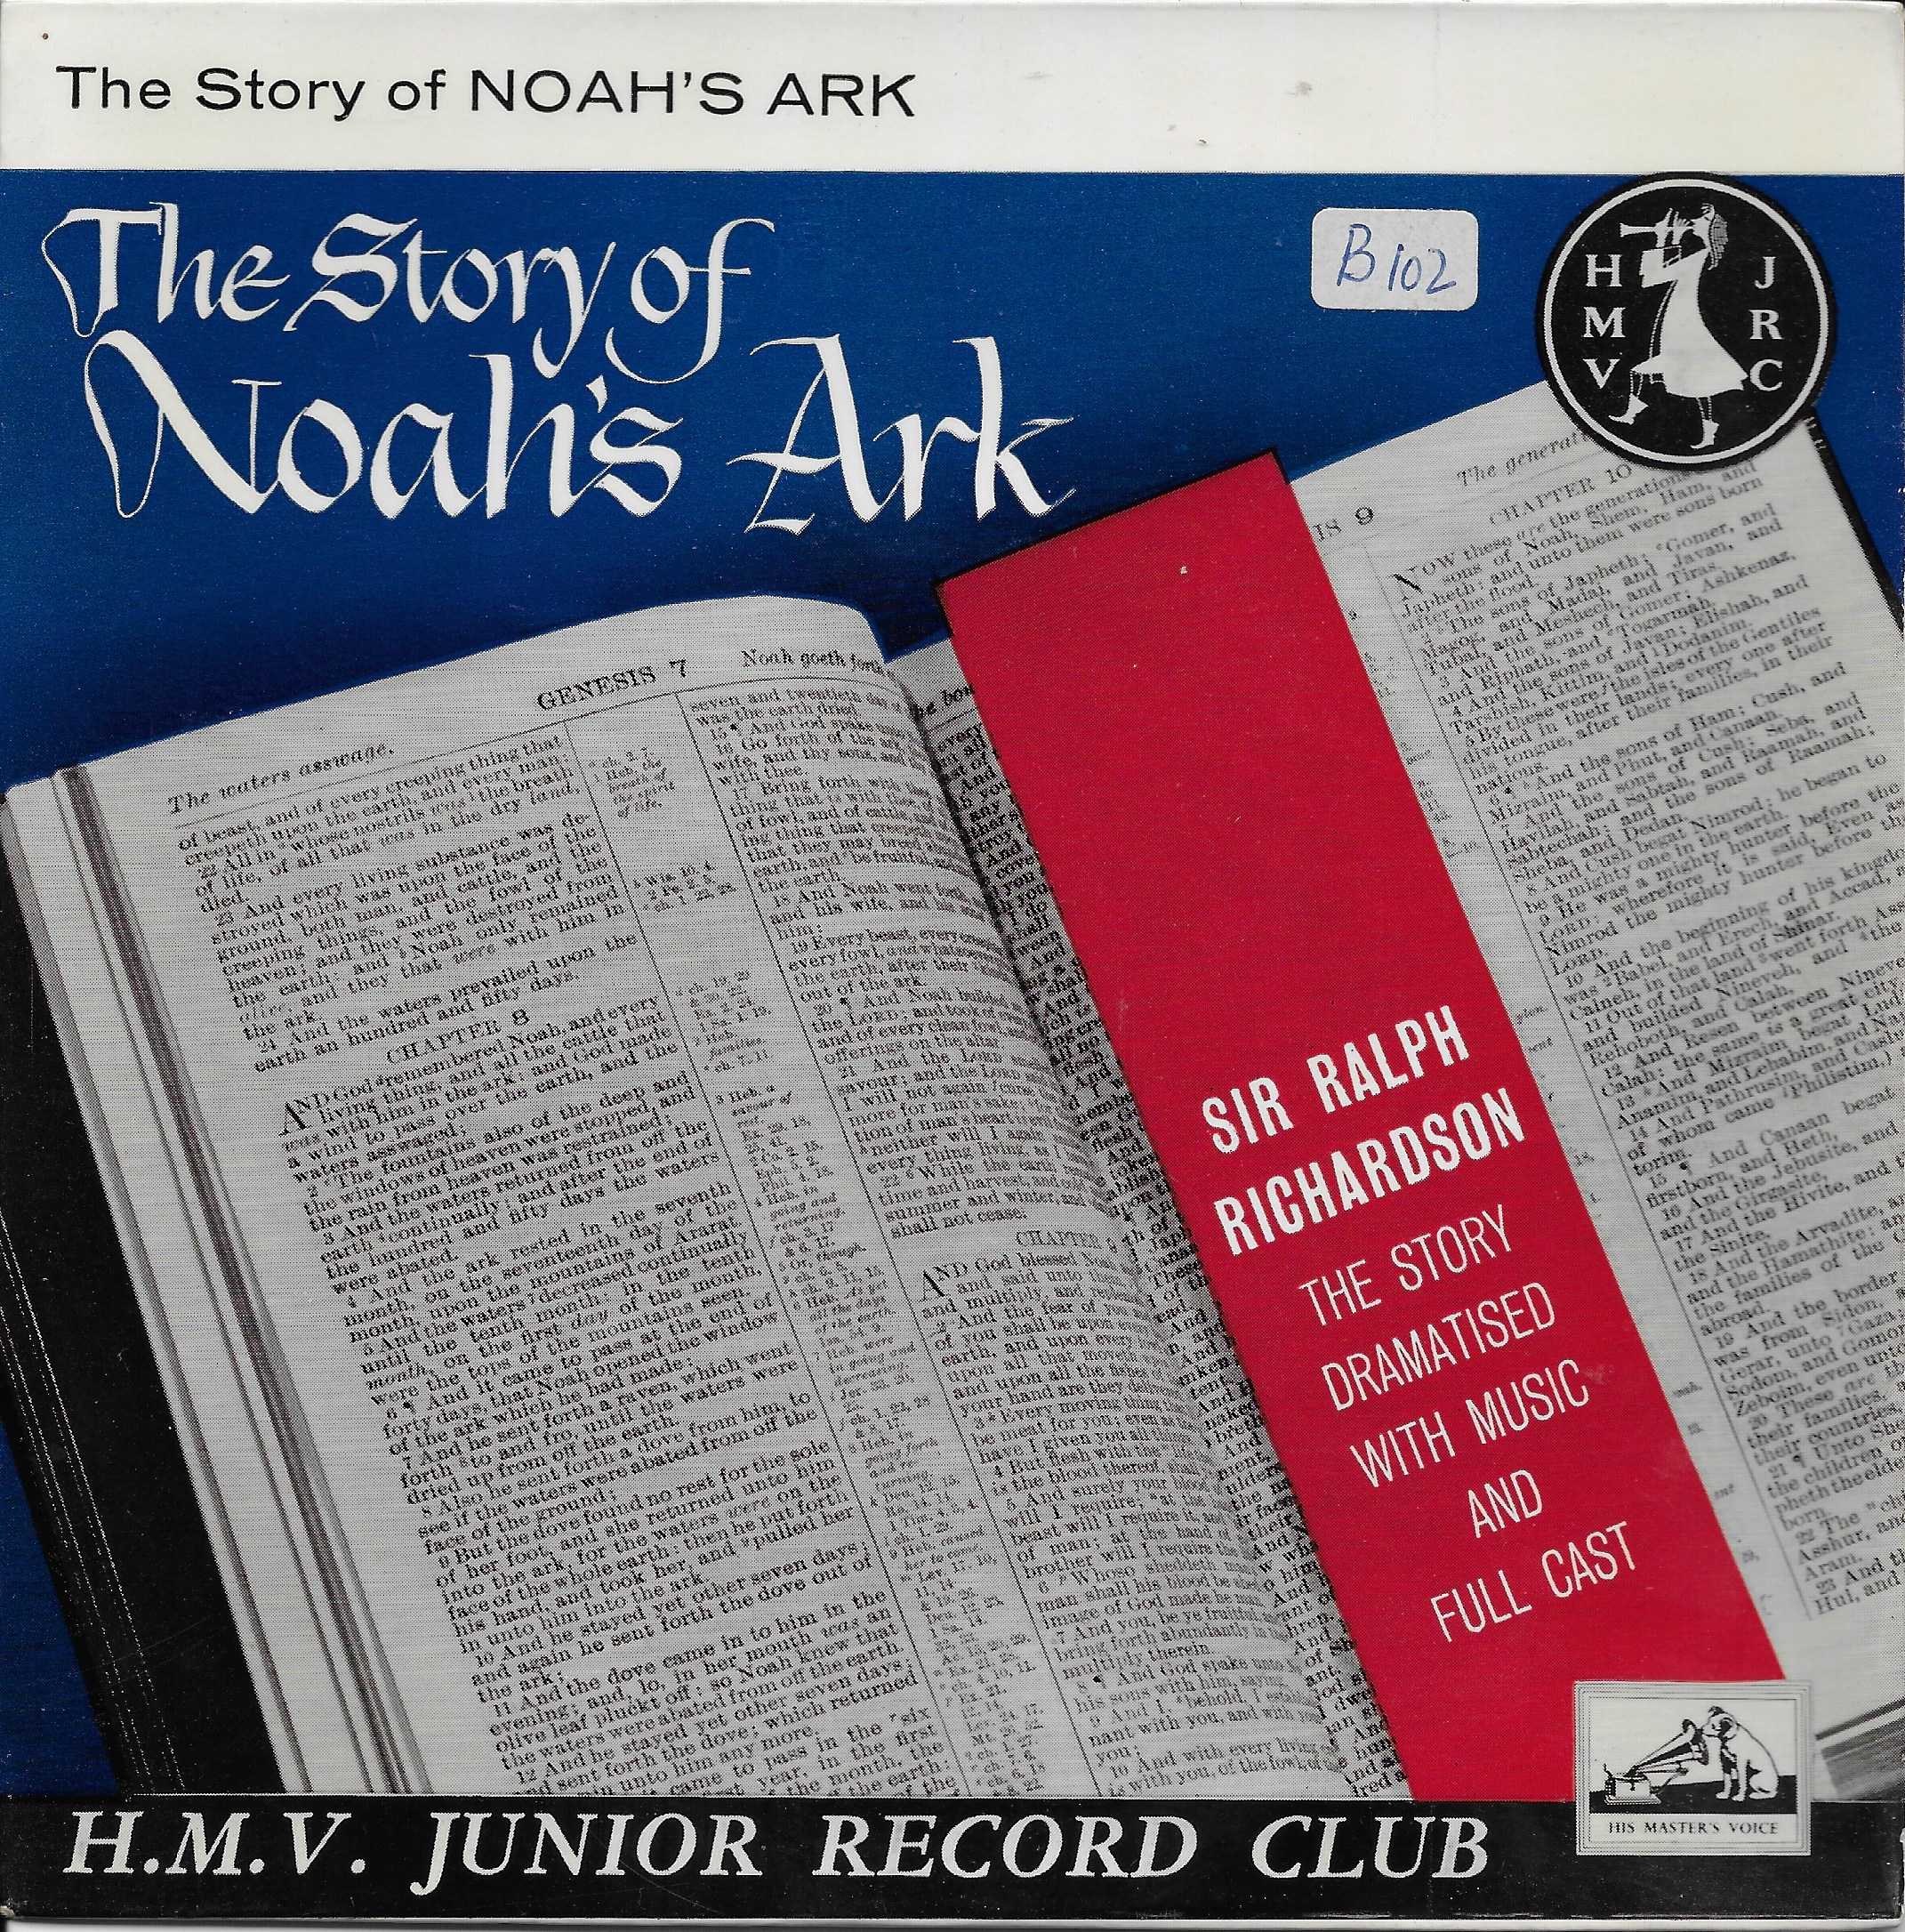 Picture of 7EG 107 The story of Noah's Ark (Red Vinyl) by artist Lord Aberdare / Cyril Ornadel from ITV, Channel 4 and Channel 5 singles library